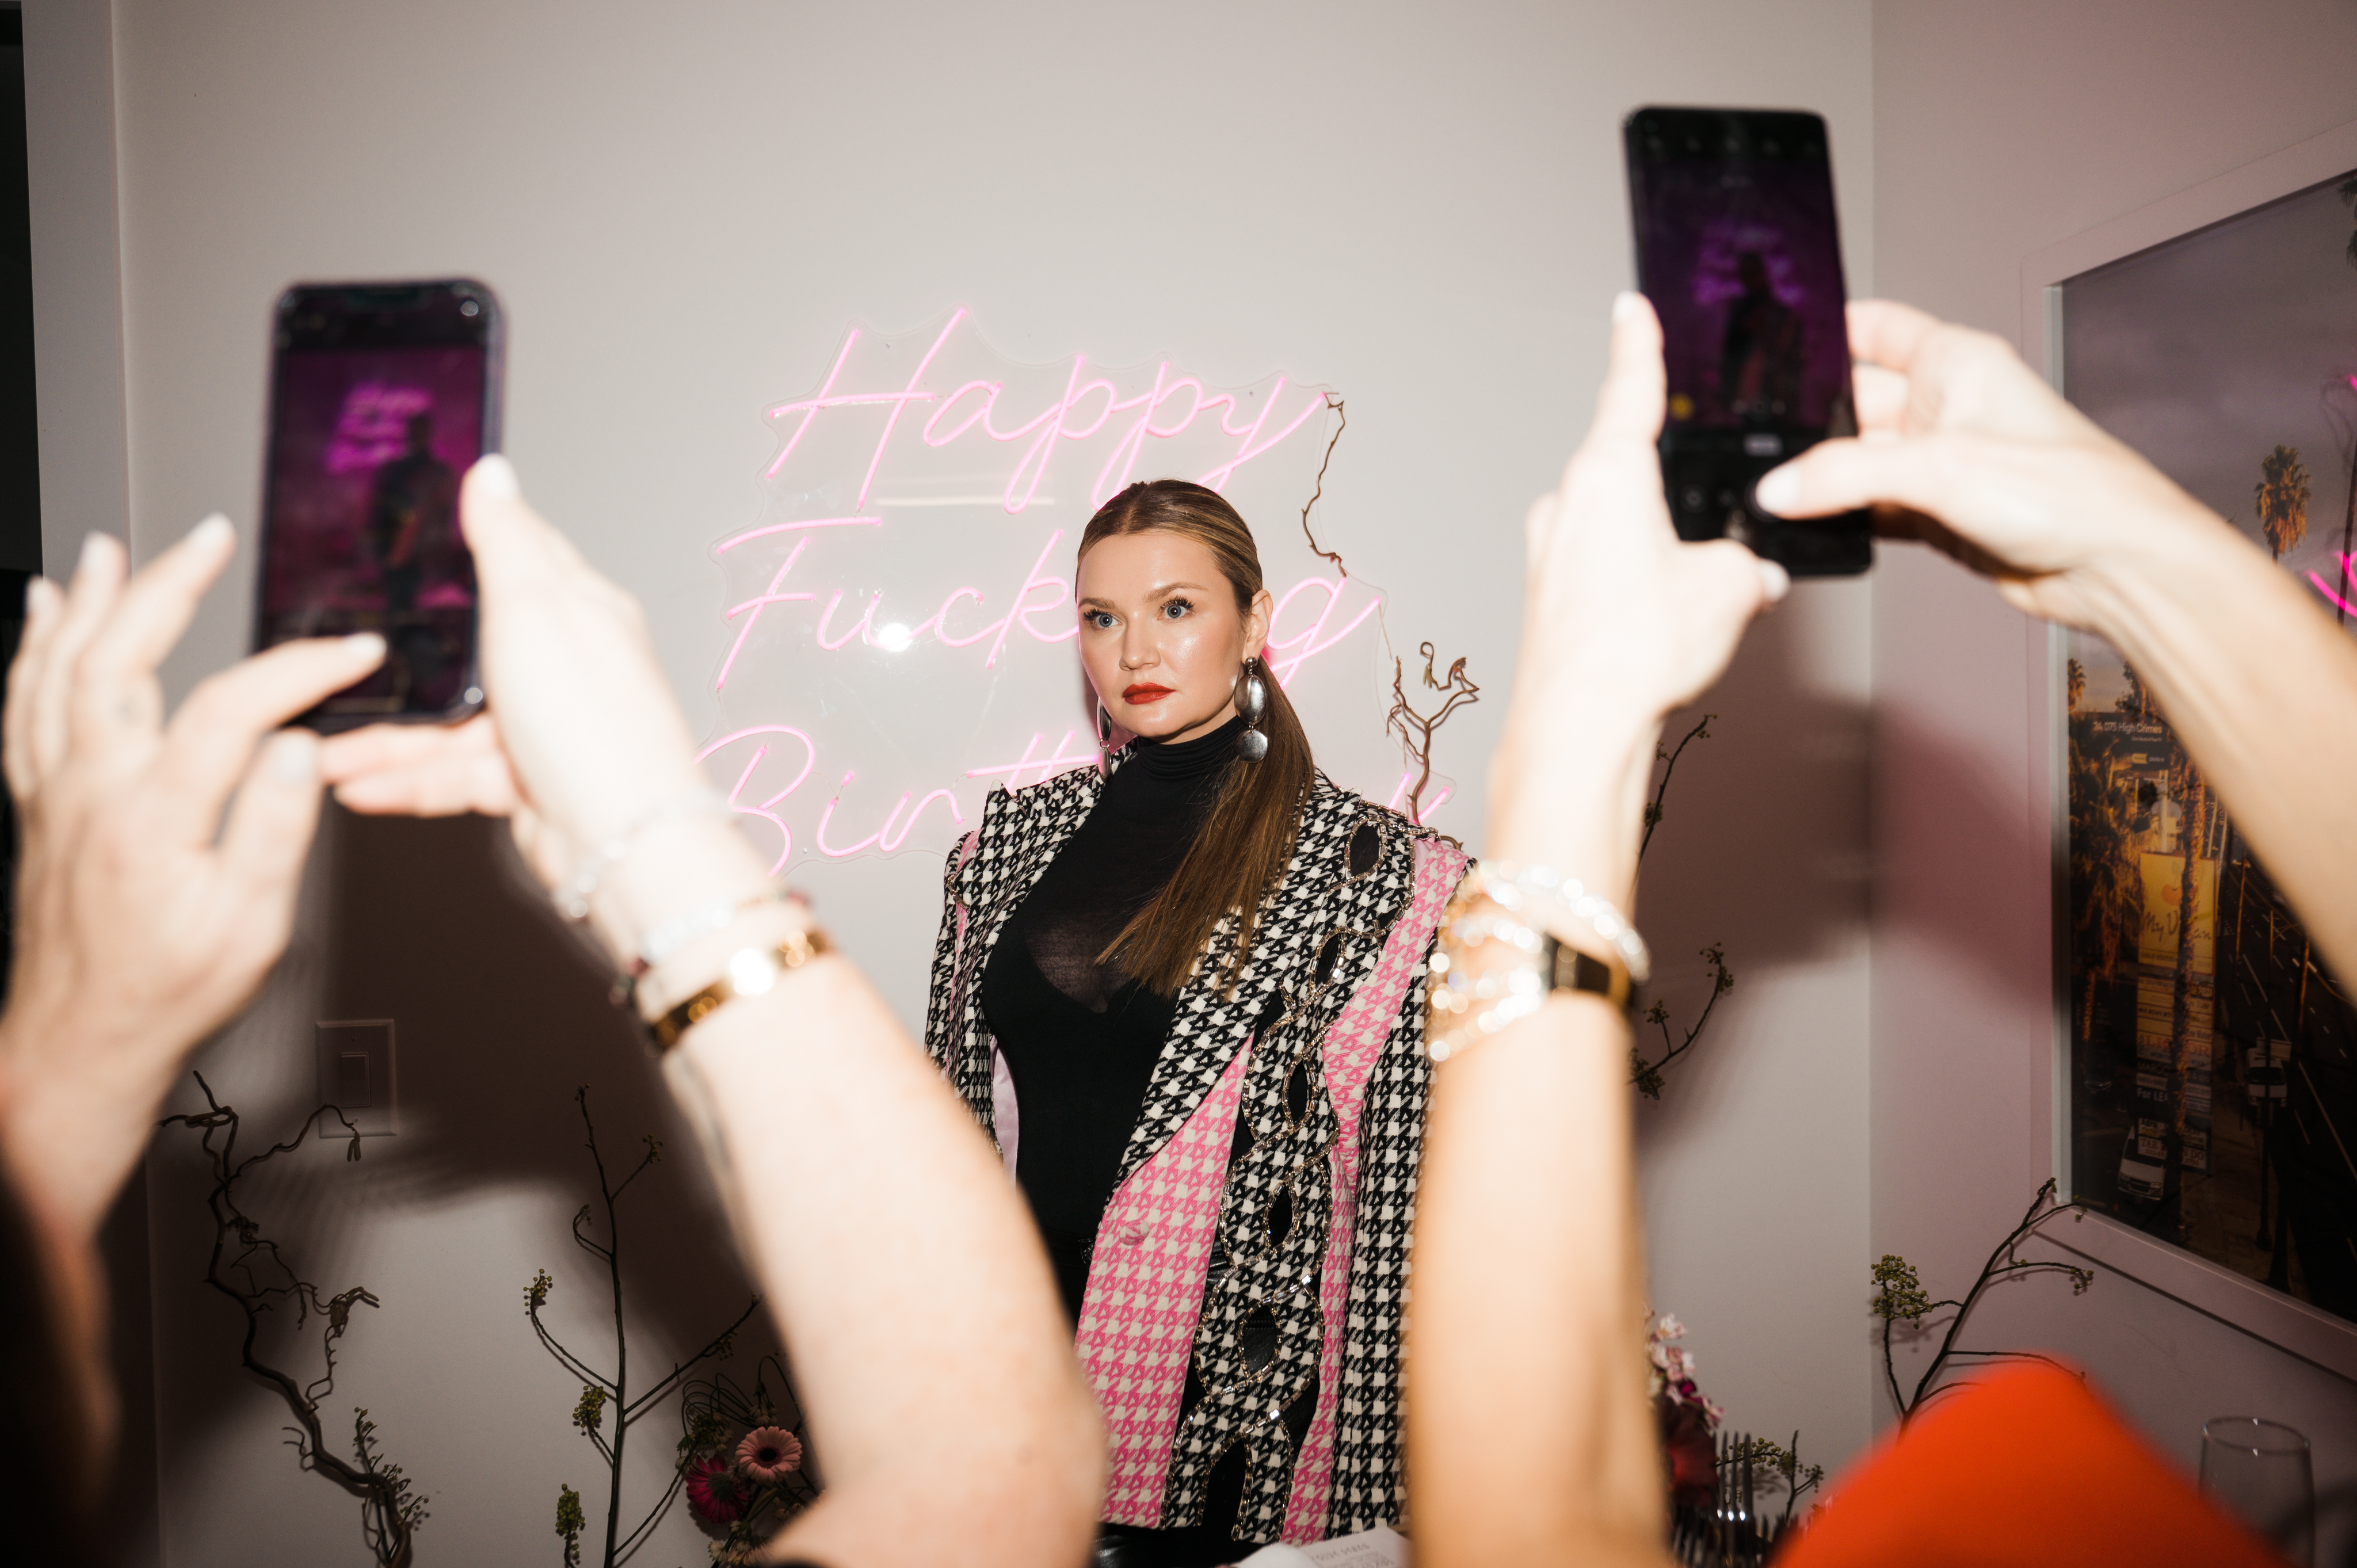 Anna Delvey pictured in her NYC apartment in front of a “Happy Fucking Birthday” neon sign.